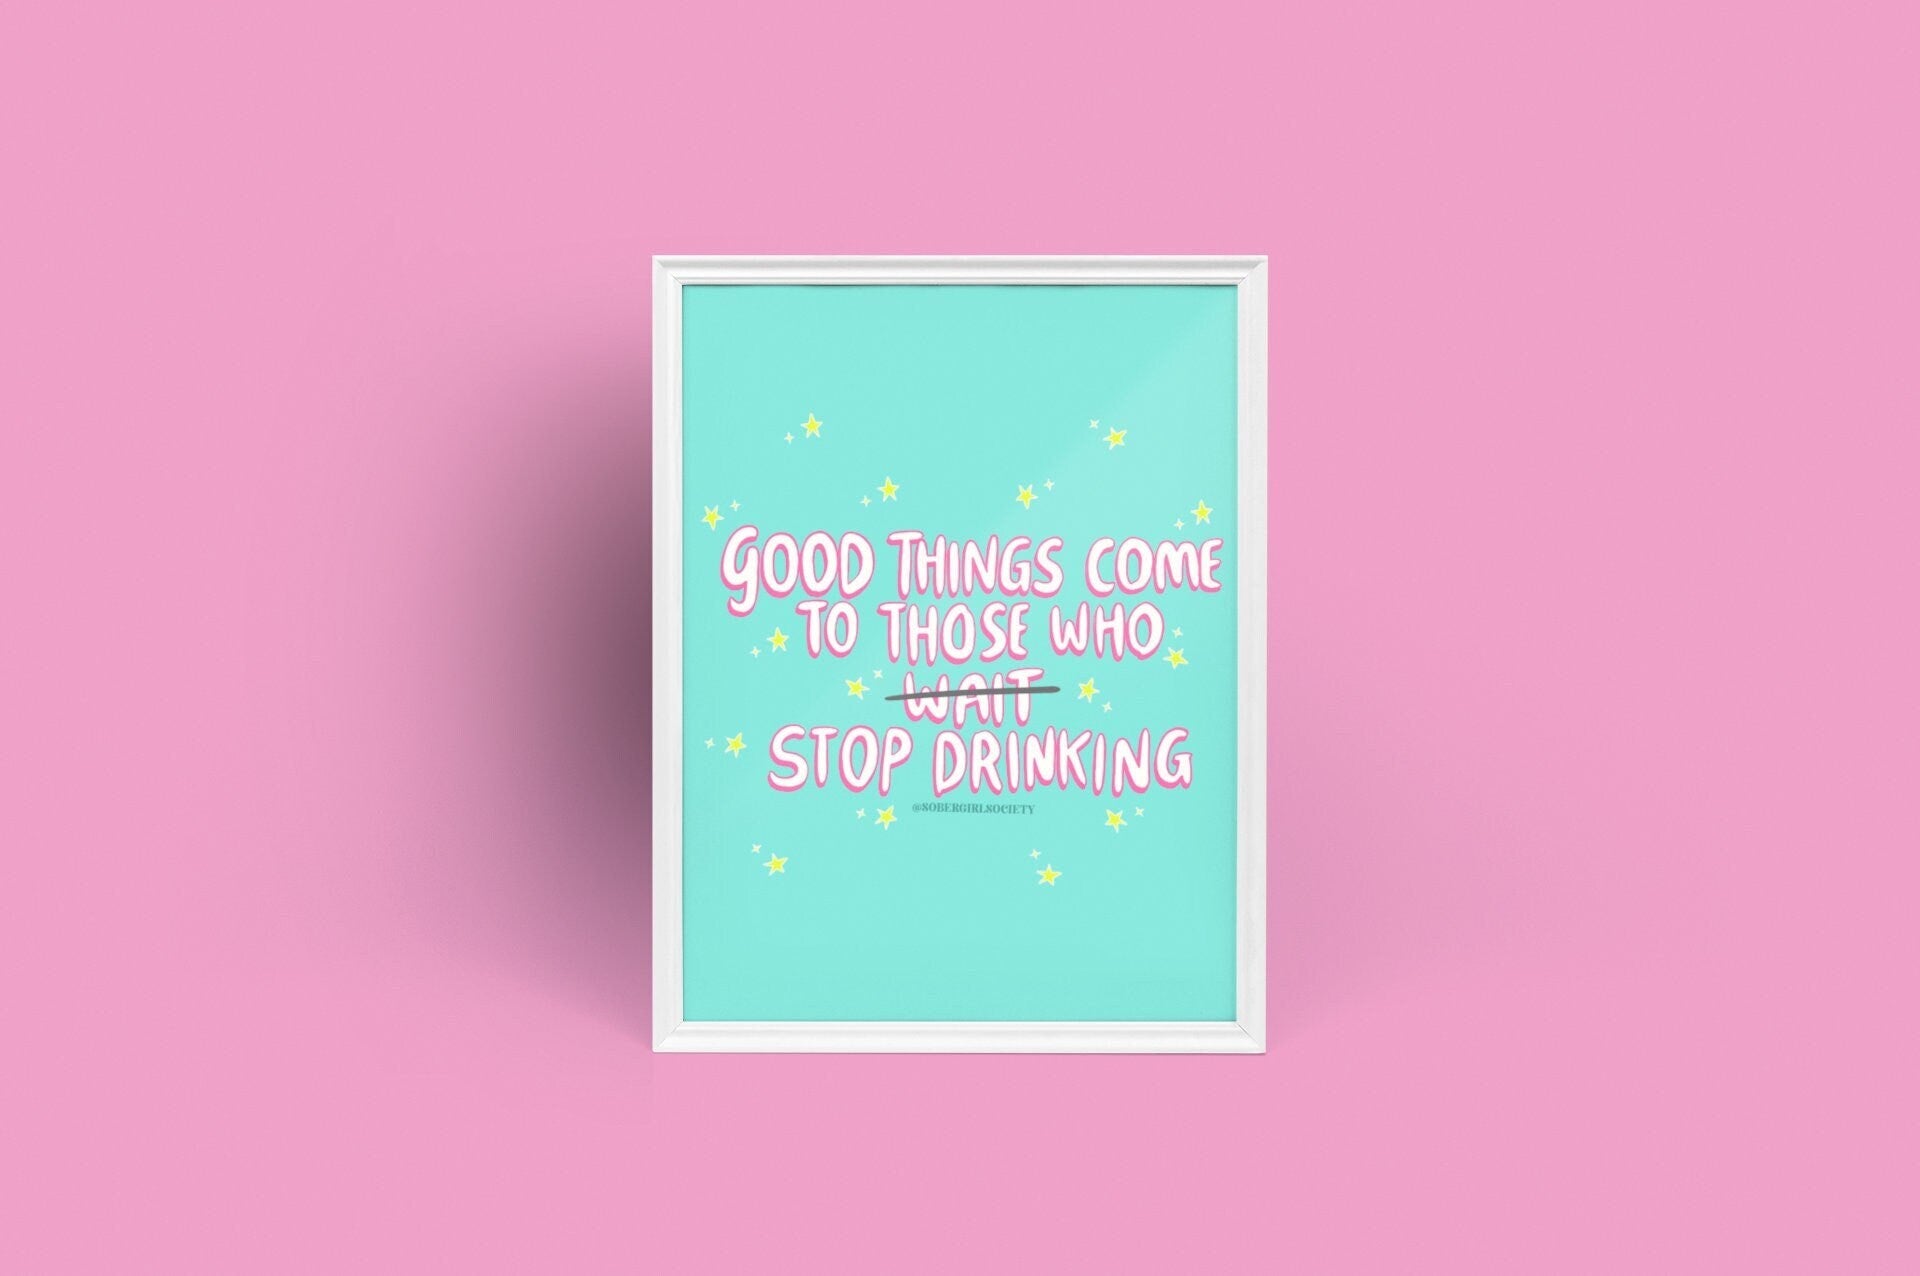 Good Things Come To Those Who Stop Drinking by Sober Girl Society Print [Digital Download]